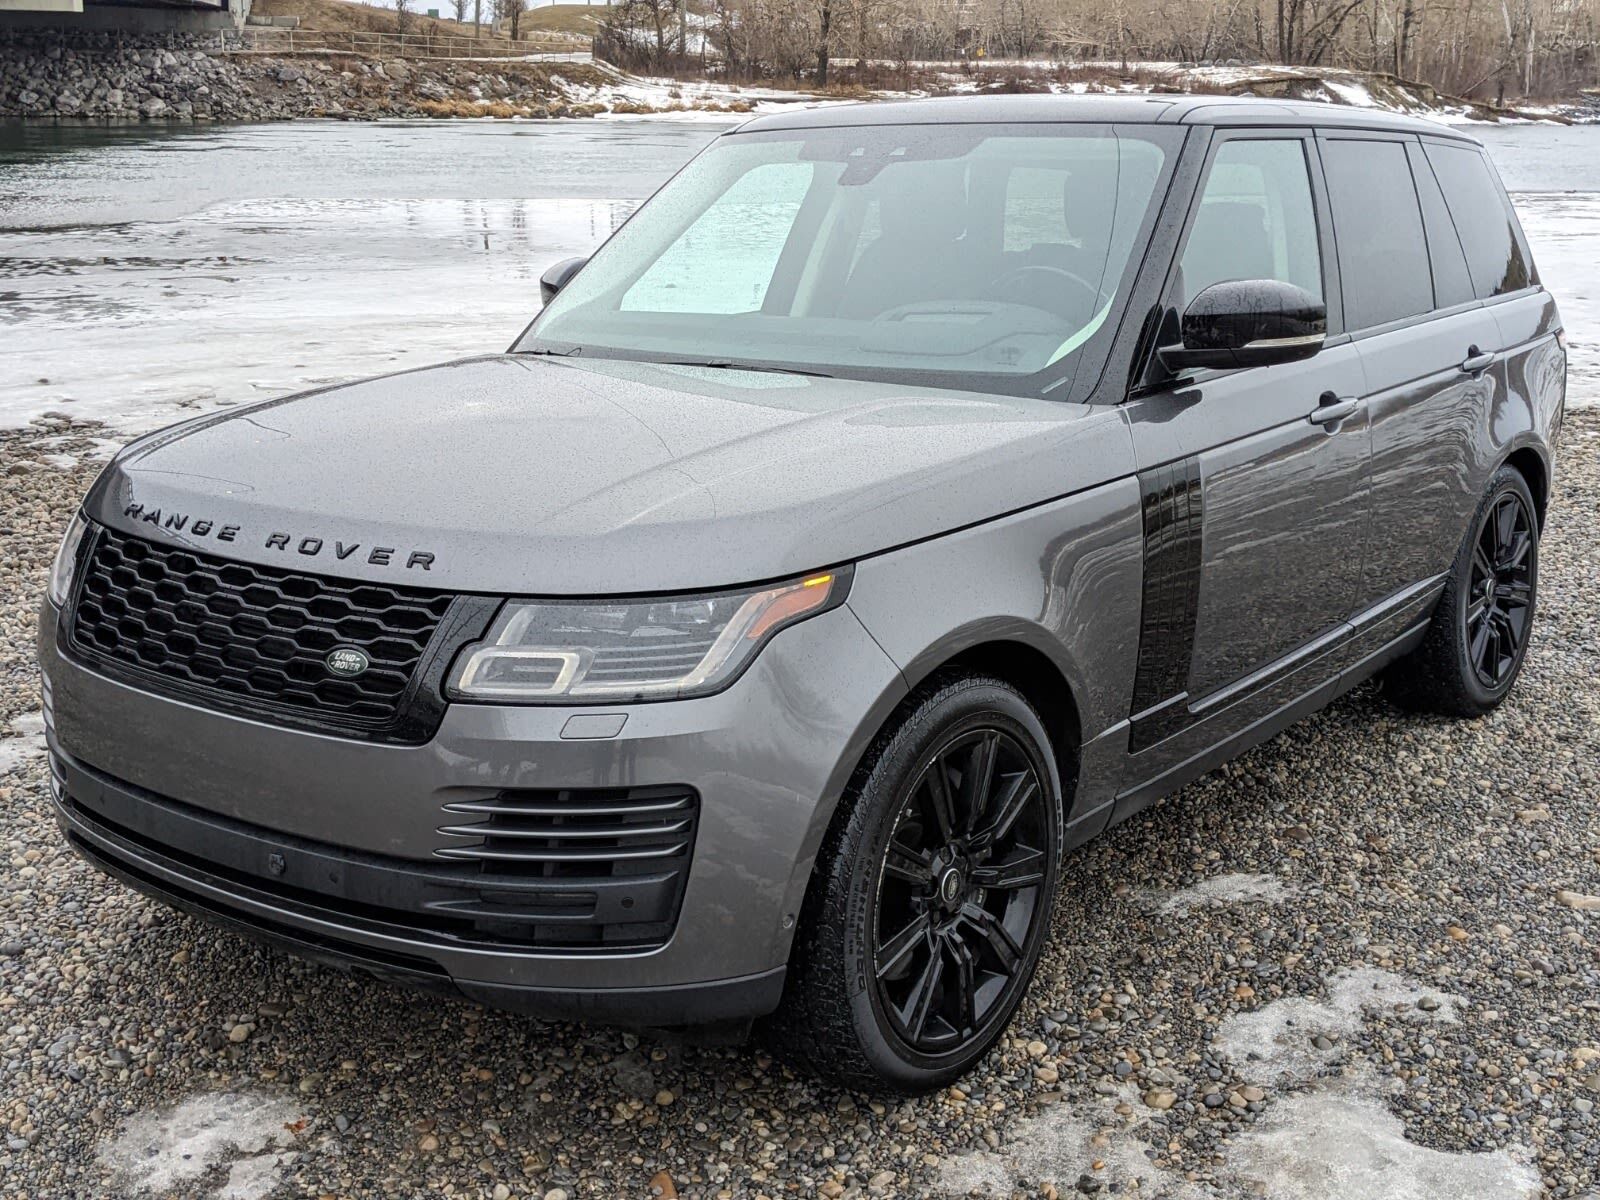 2018 Land Rover Range Rover NEW TIRES AND REAR BRAKES - UP TO DATE SERVICE!!